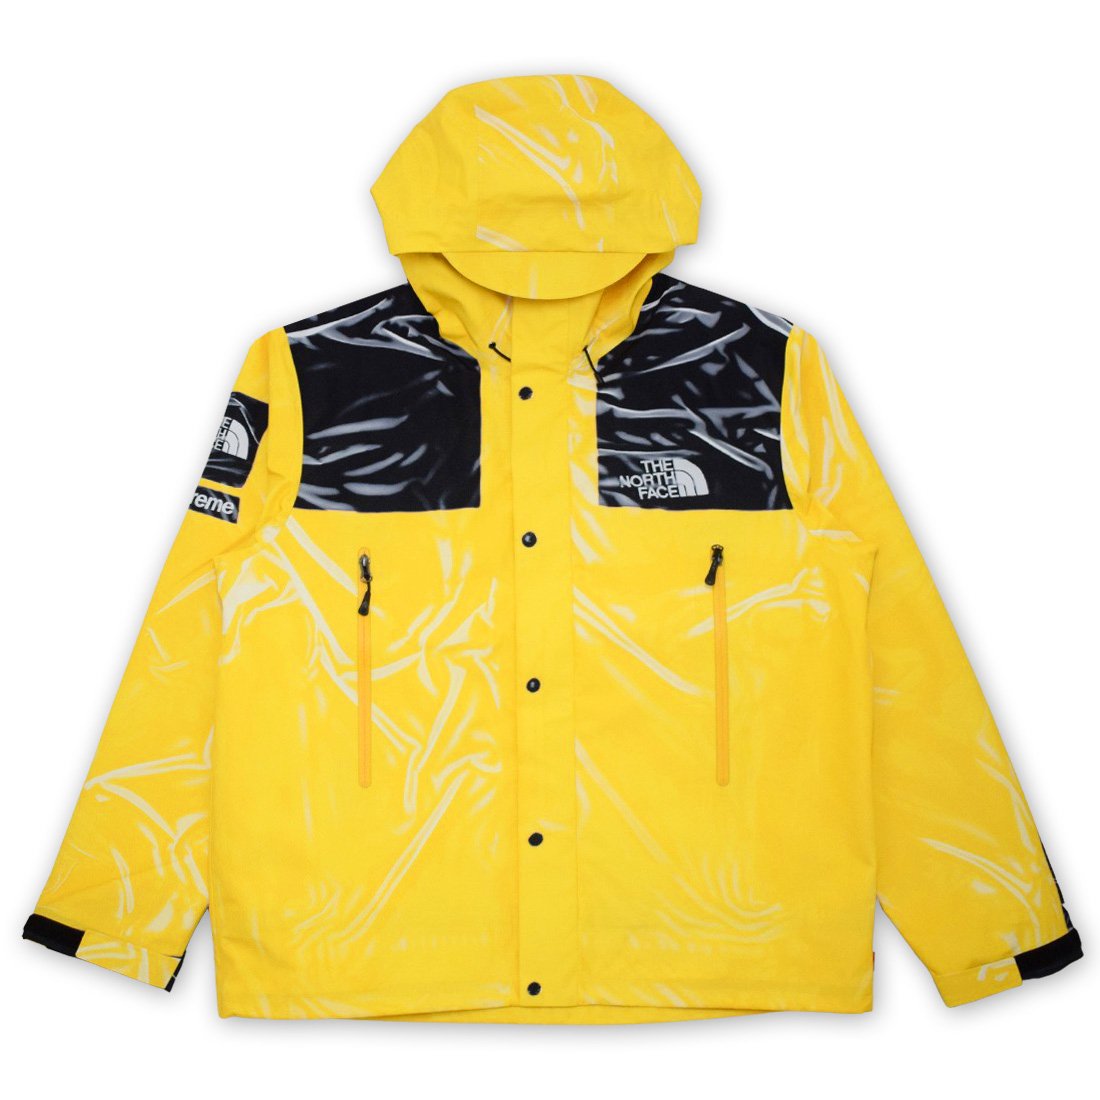 SUPREME X THE NORTH FACE TROMPE LOEIL PRINTED TAPED JACKET ...